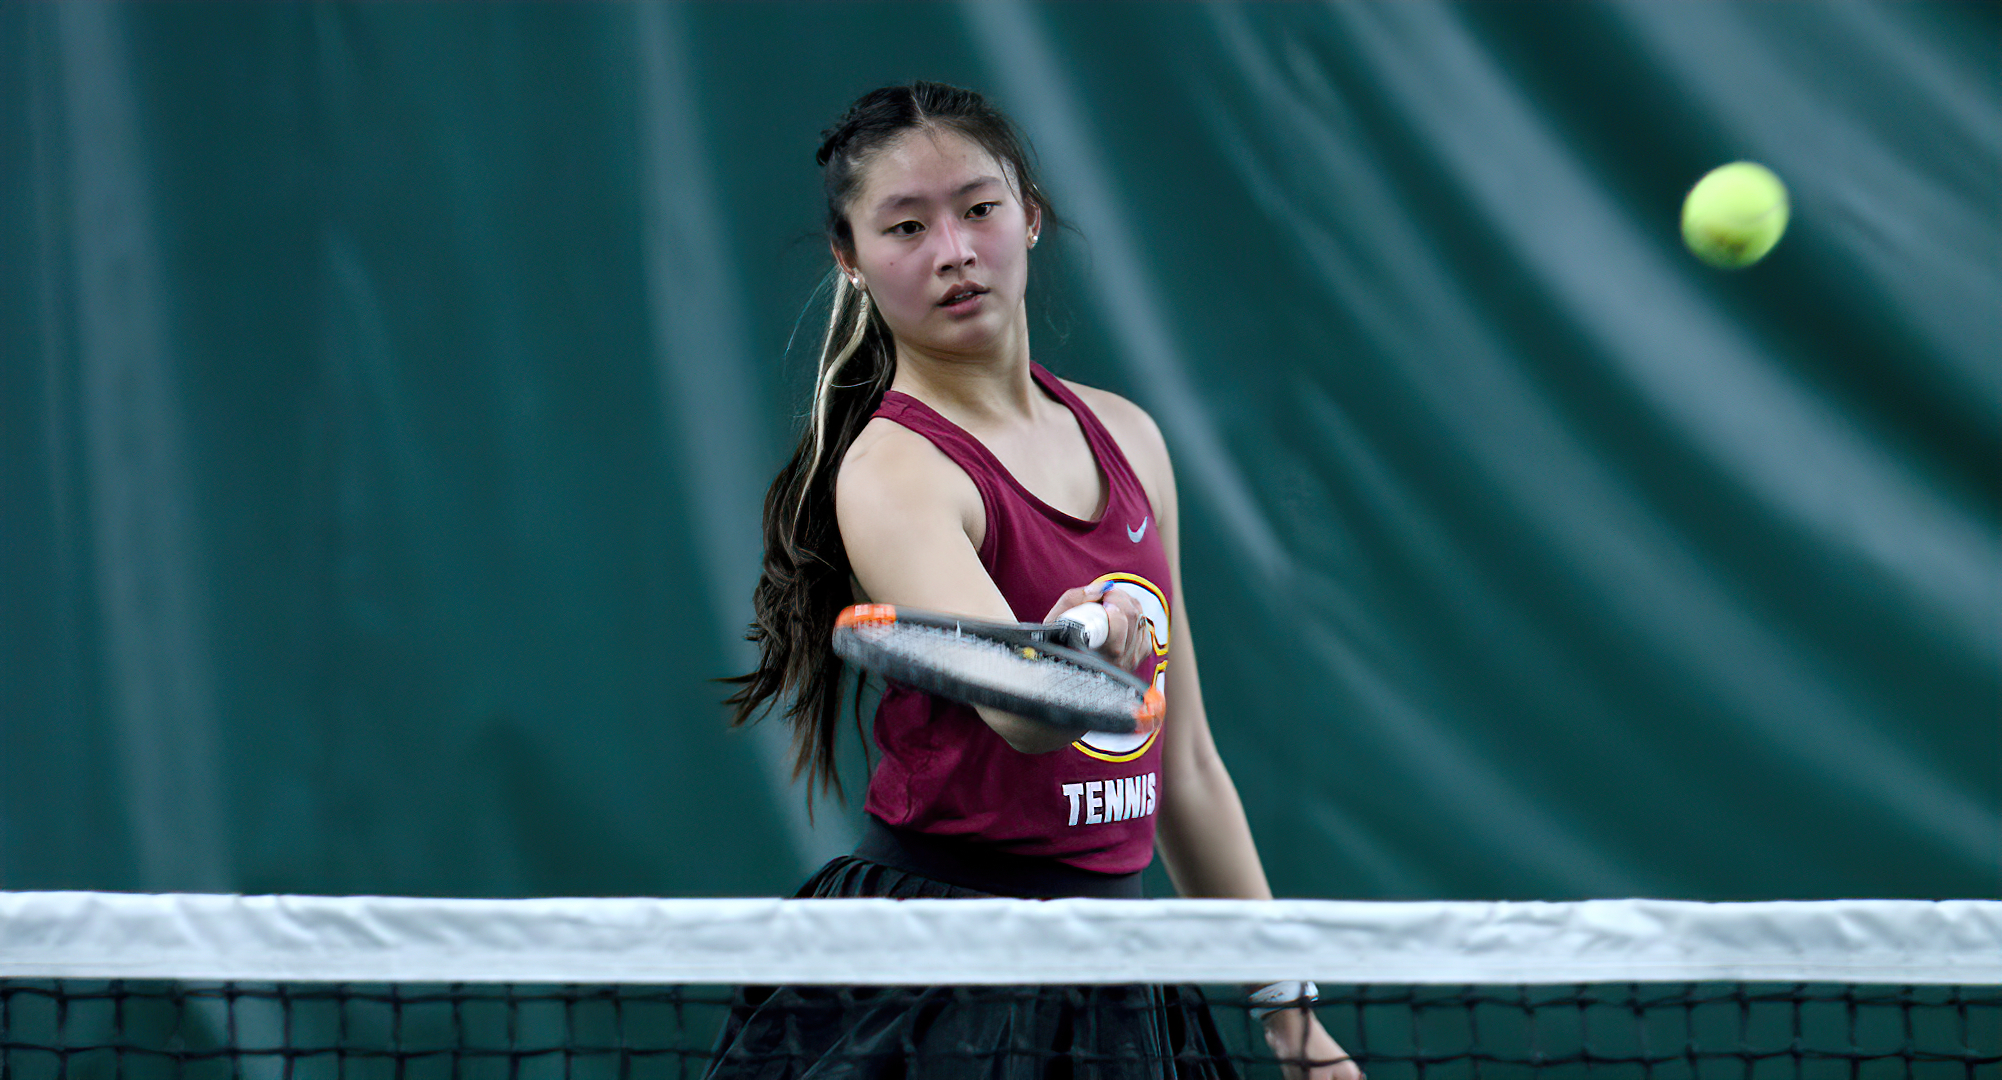 Junior Emily Savageau paired with Mary Skorich to win both of their doubles matches and help the Cobbers post wins over Houghton and Adrian.